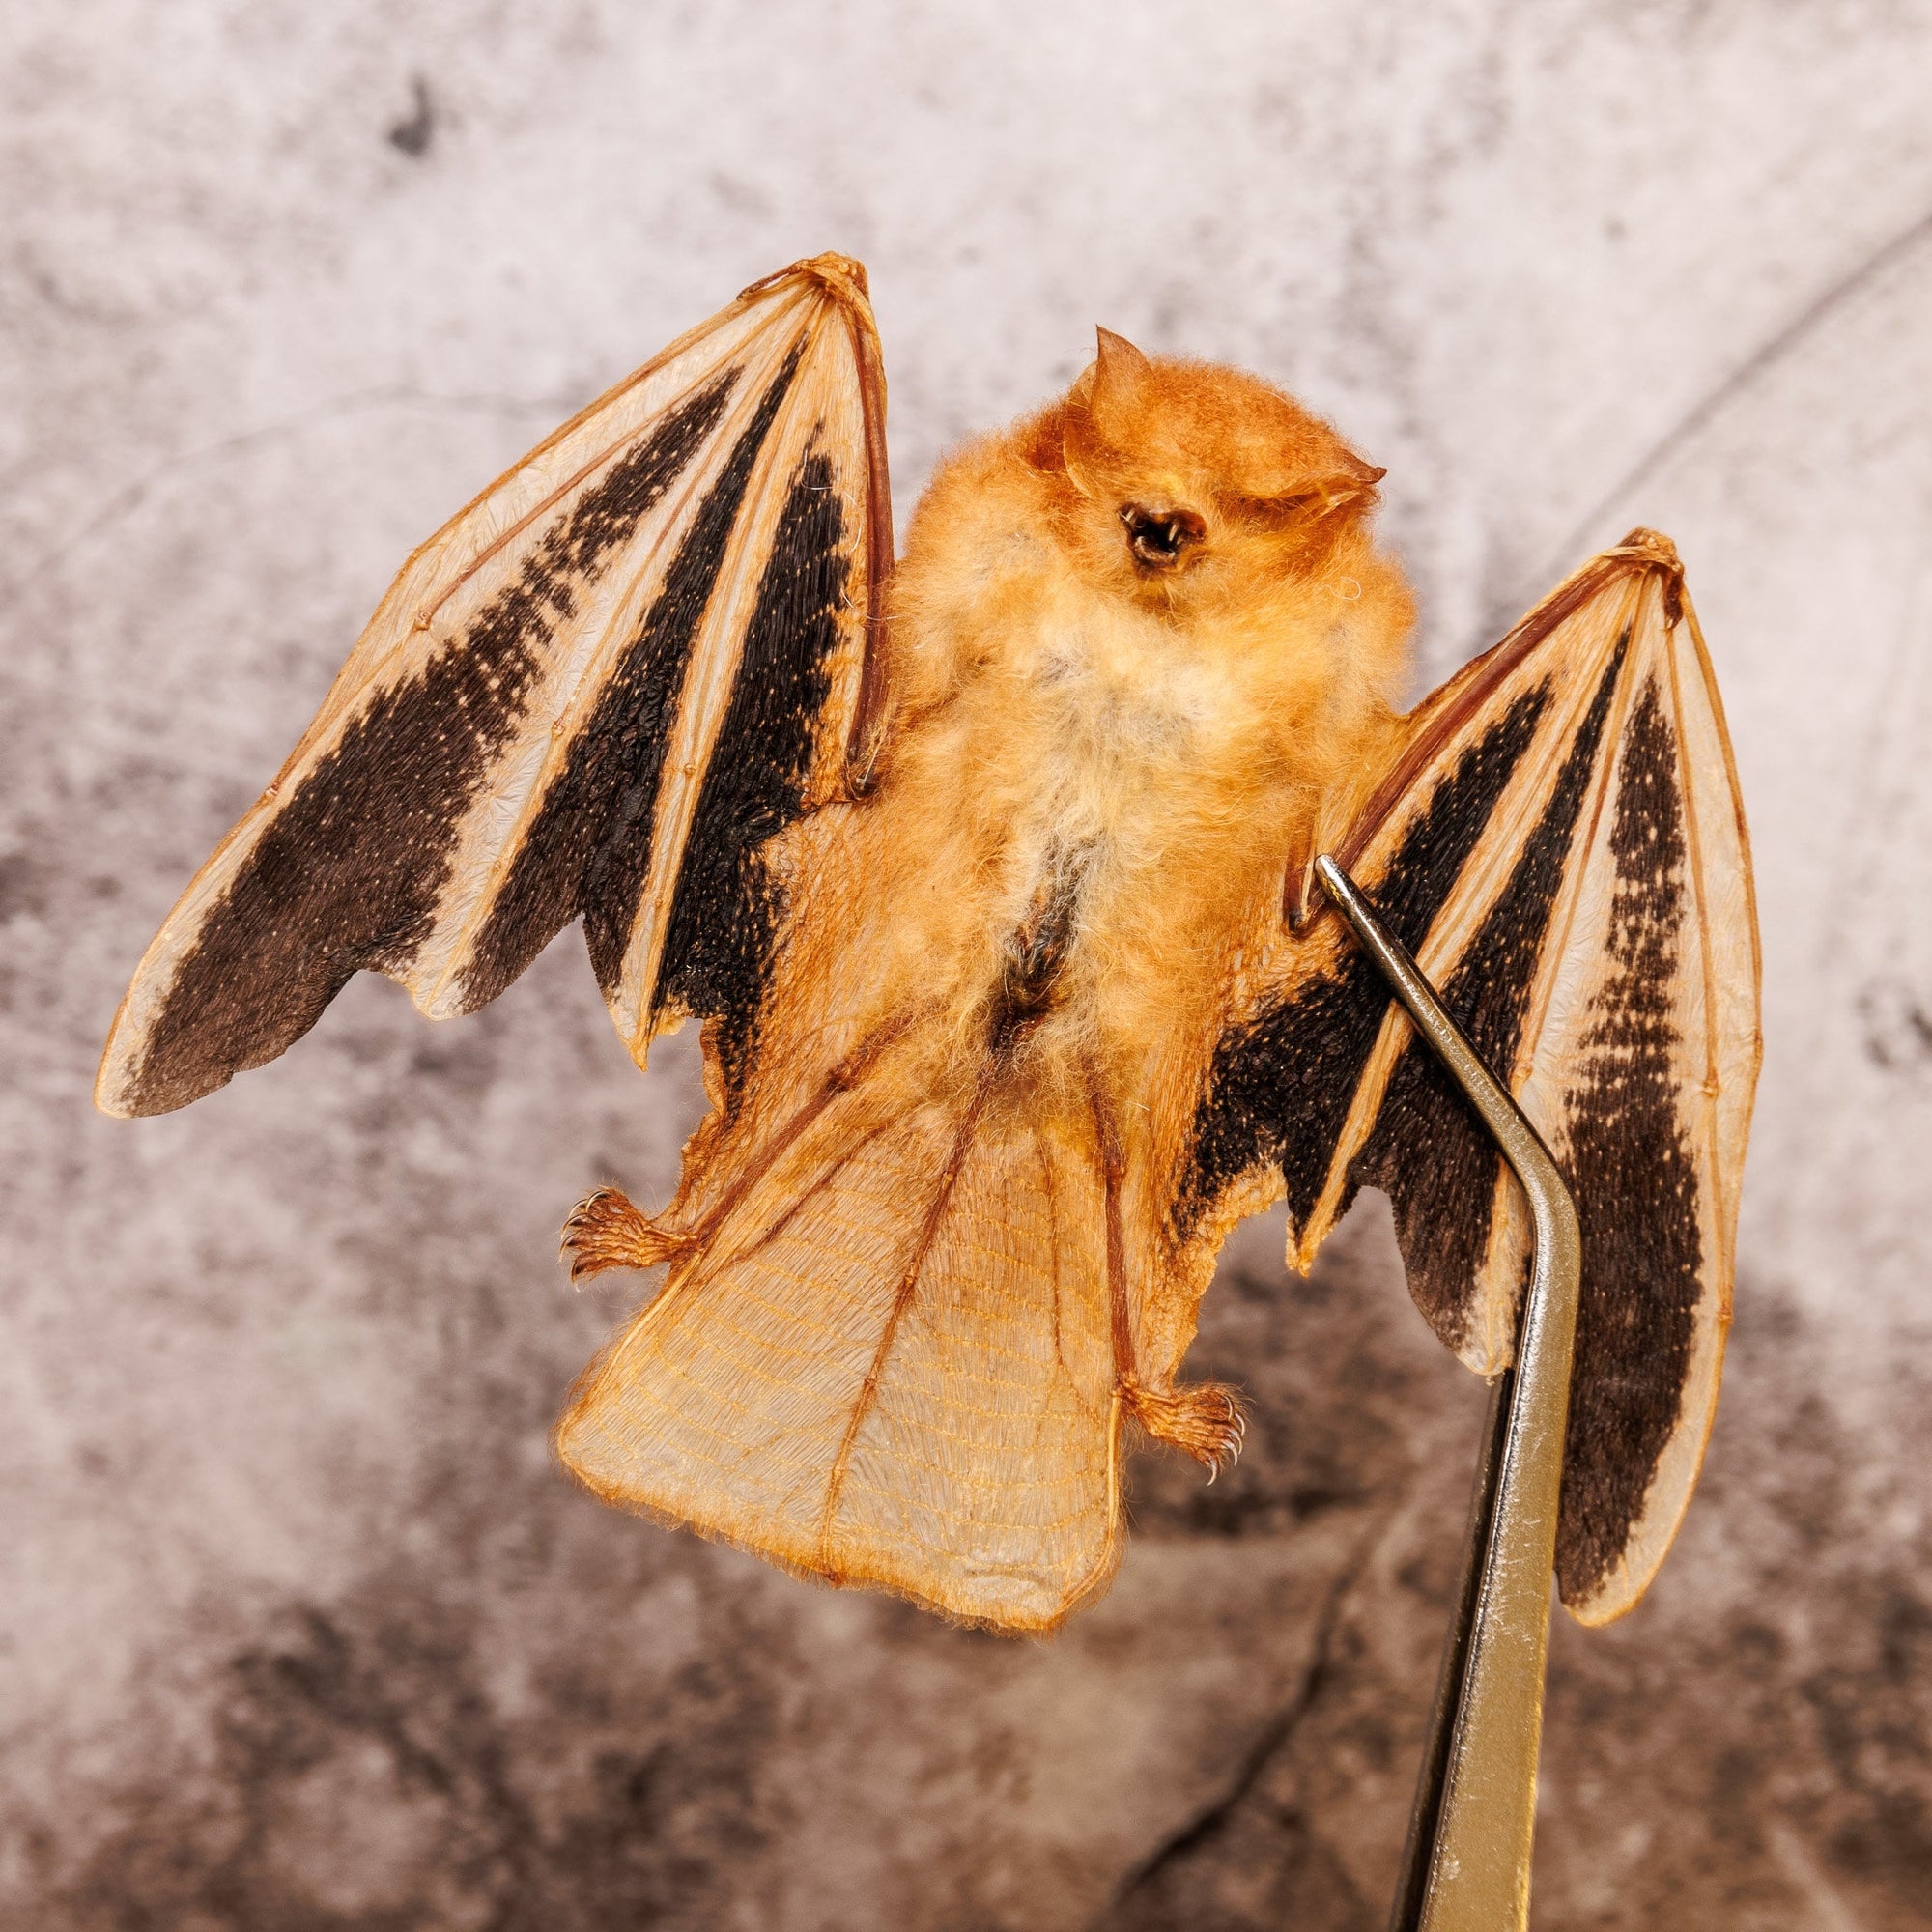 THREE (3) Fire Bats Folded Wings (Kerivoula picta) | 4 Inch Wingspan Dry-Preserved Taxidermy (Non-CITES) Ideal for Artistic Creation